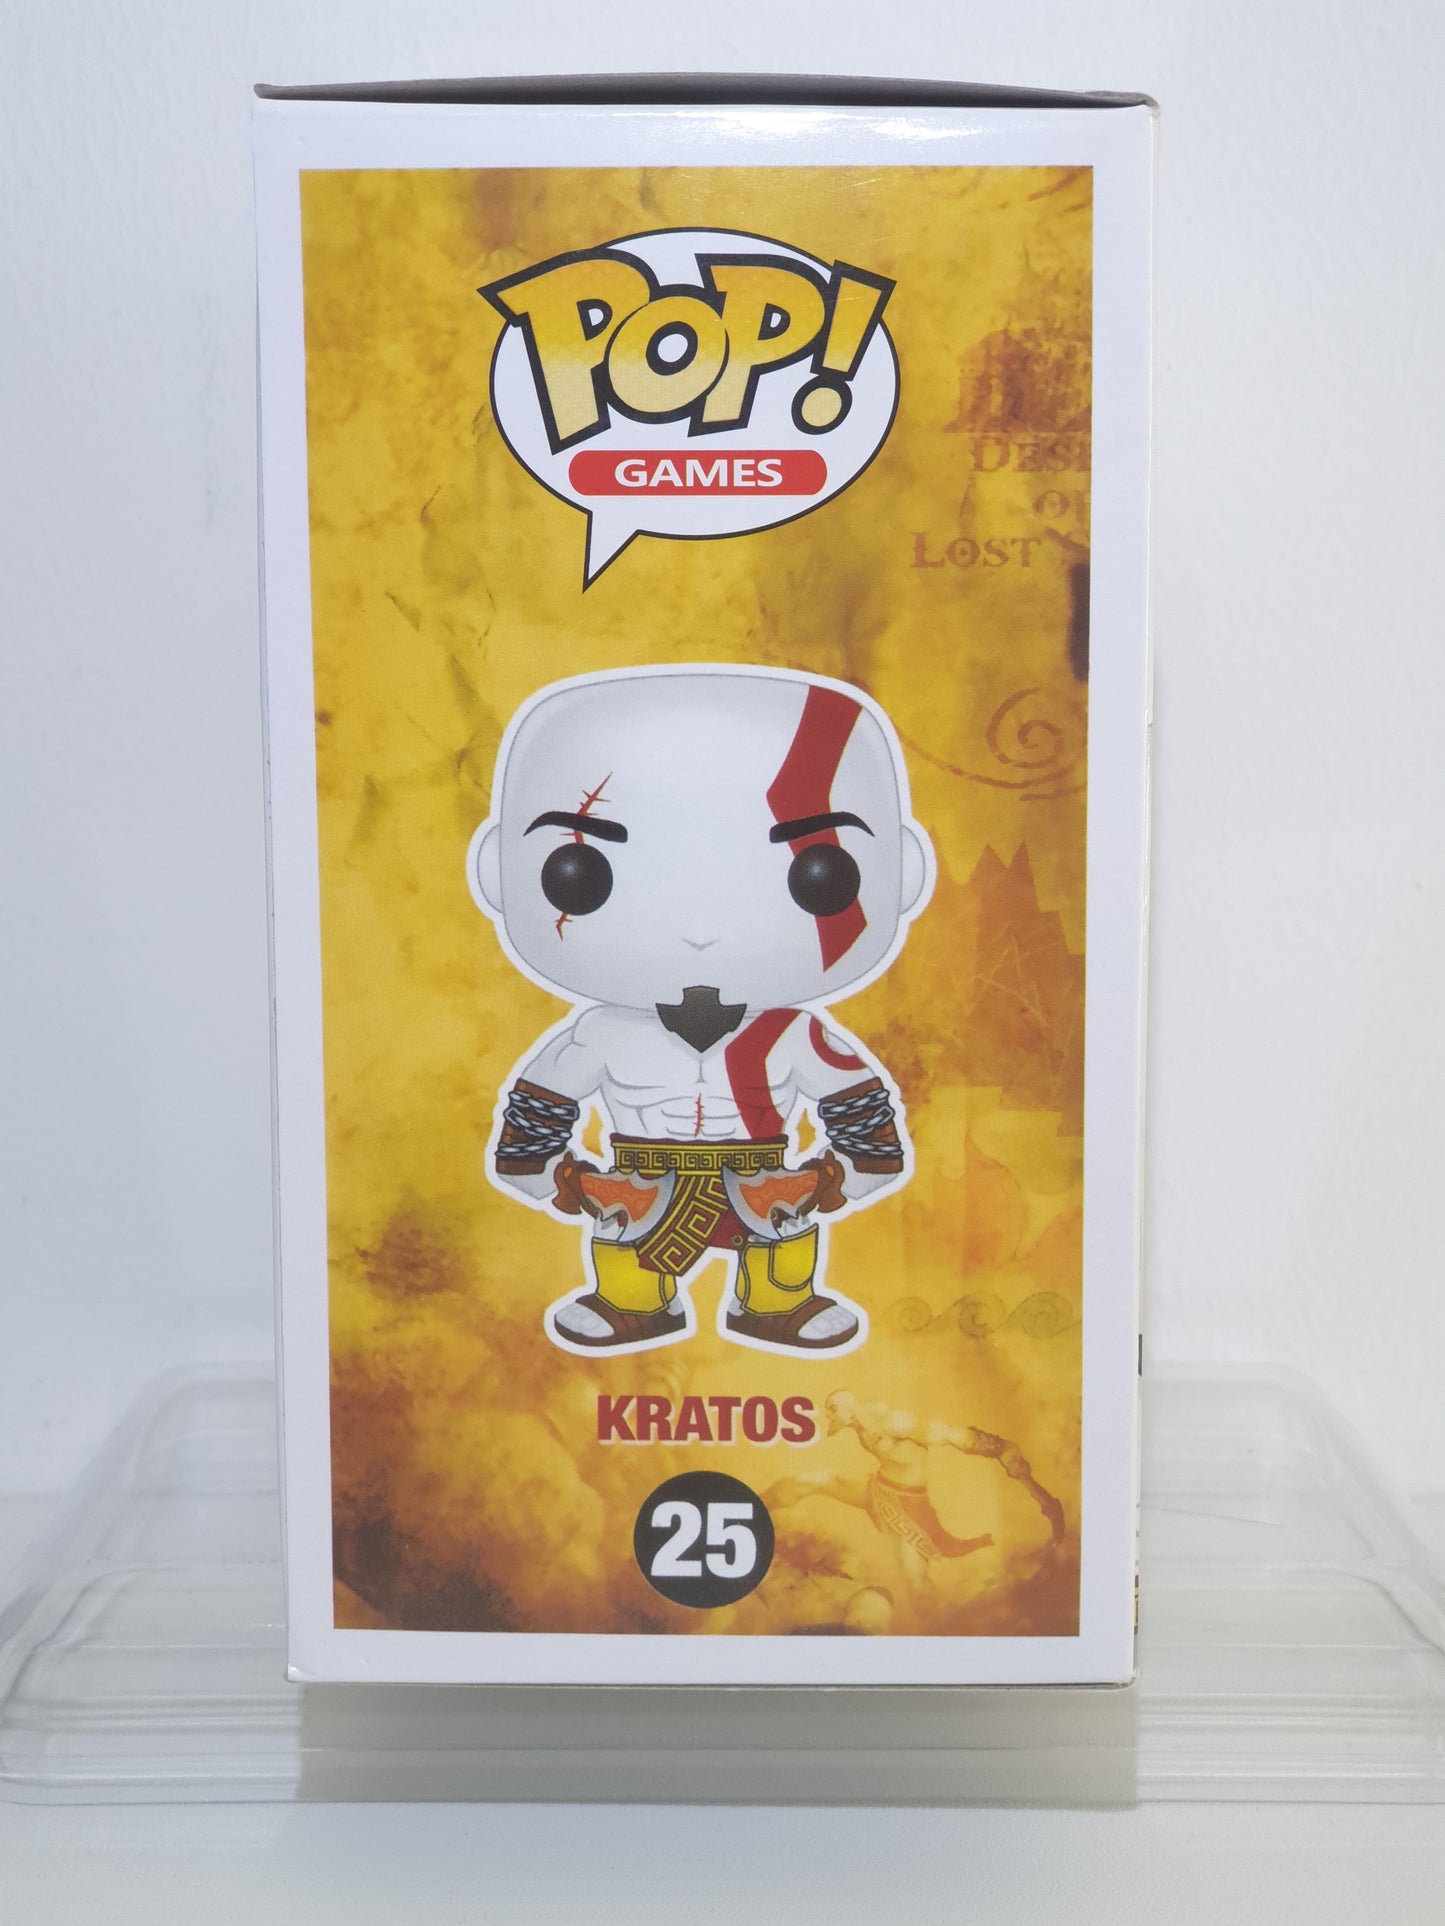 FUNKO POP 25 - GOD OF WAR - KRATOS - NEW YORK COMIC CON LIMITED EDITION - OCCASION